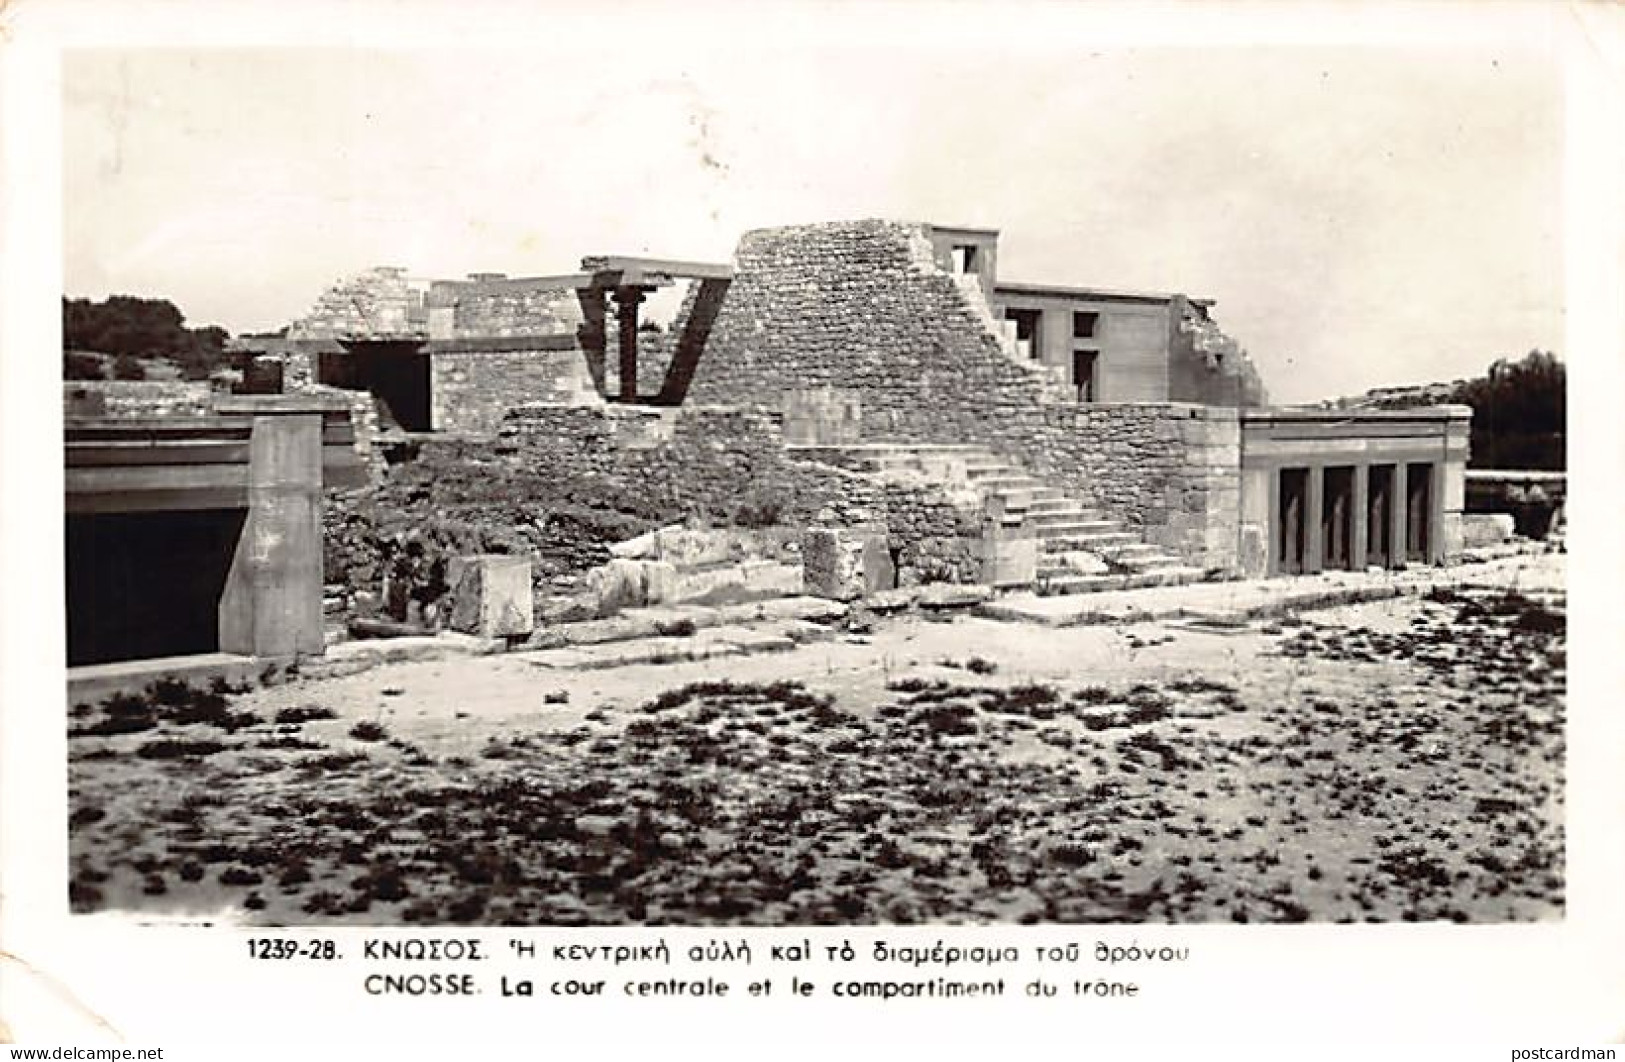 Crete - KNOSSOS - Central Courtyard - Publ. Unknown 1239 28 - Greece